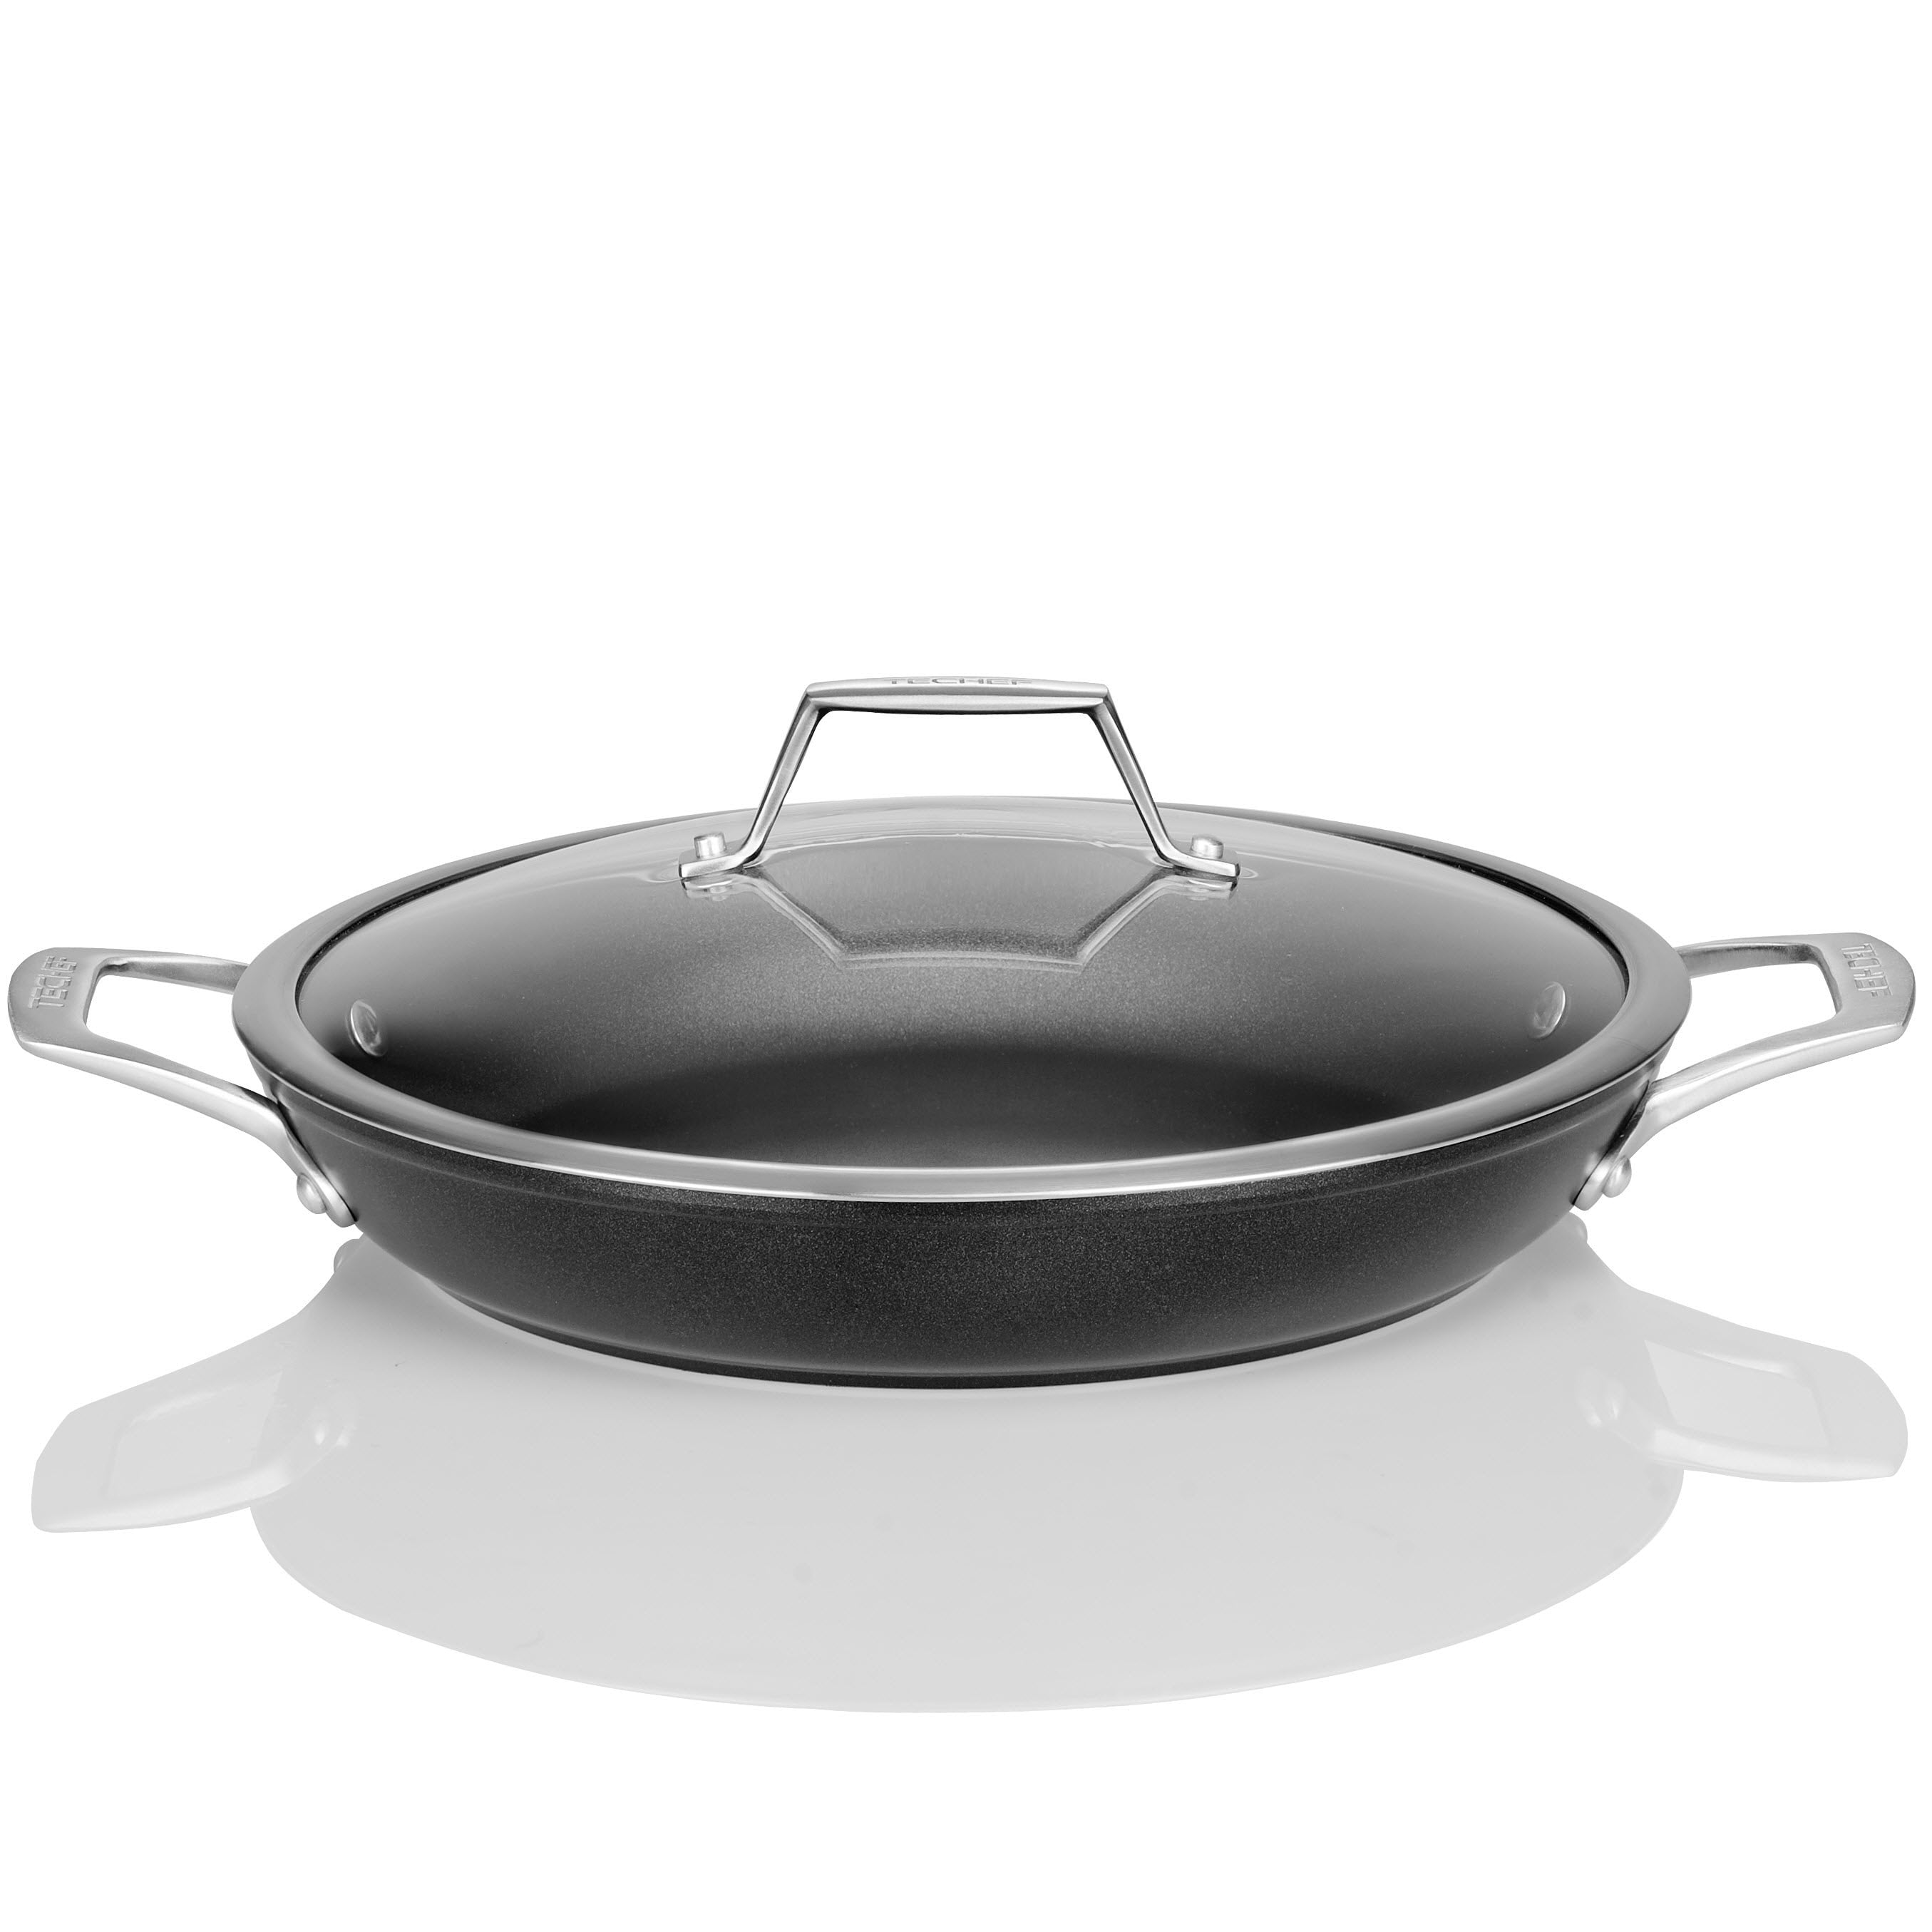 Onyx Collection 12 Wok/Stir-Fry Pan with Glass Lid Coated with New Teflon Platinum Non-Stick Coating TECHEF 